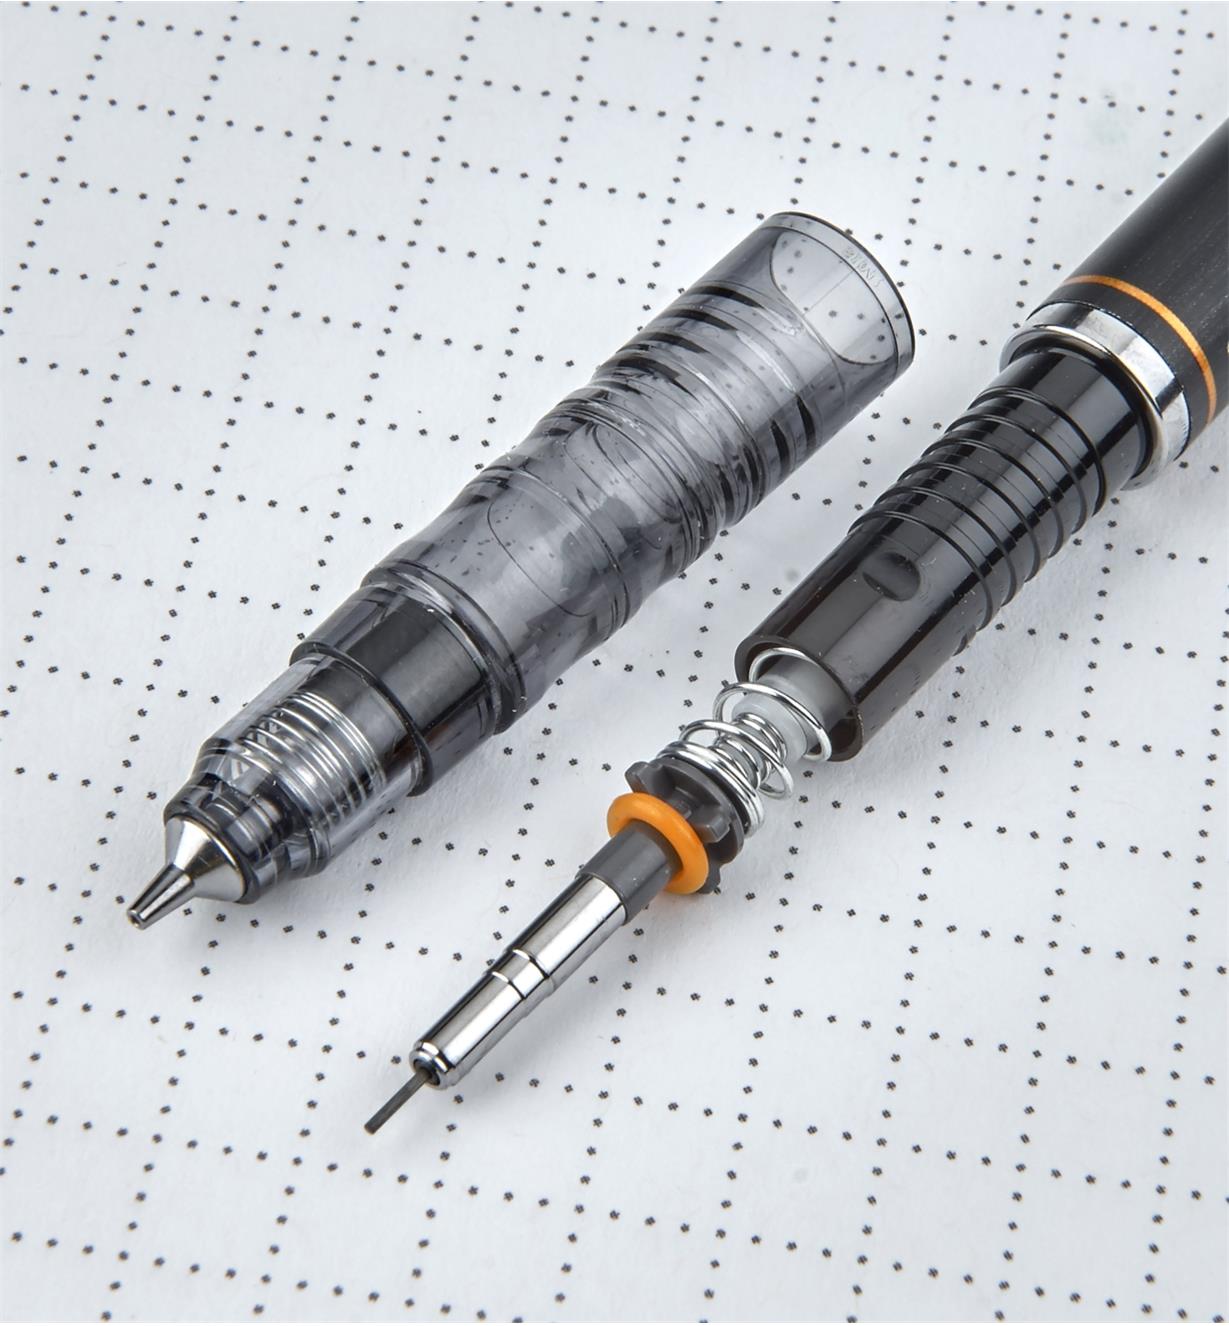 Mechanical pencil with part of the housing removed to show the lead-advancement mechanism